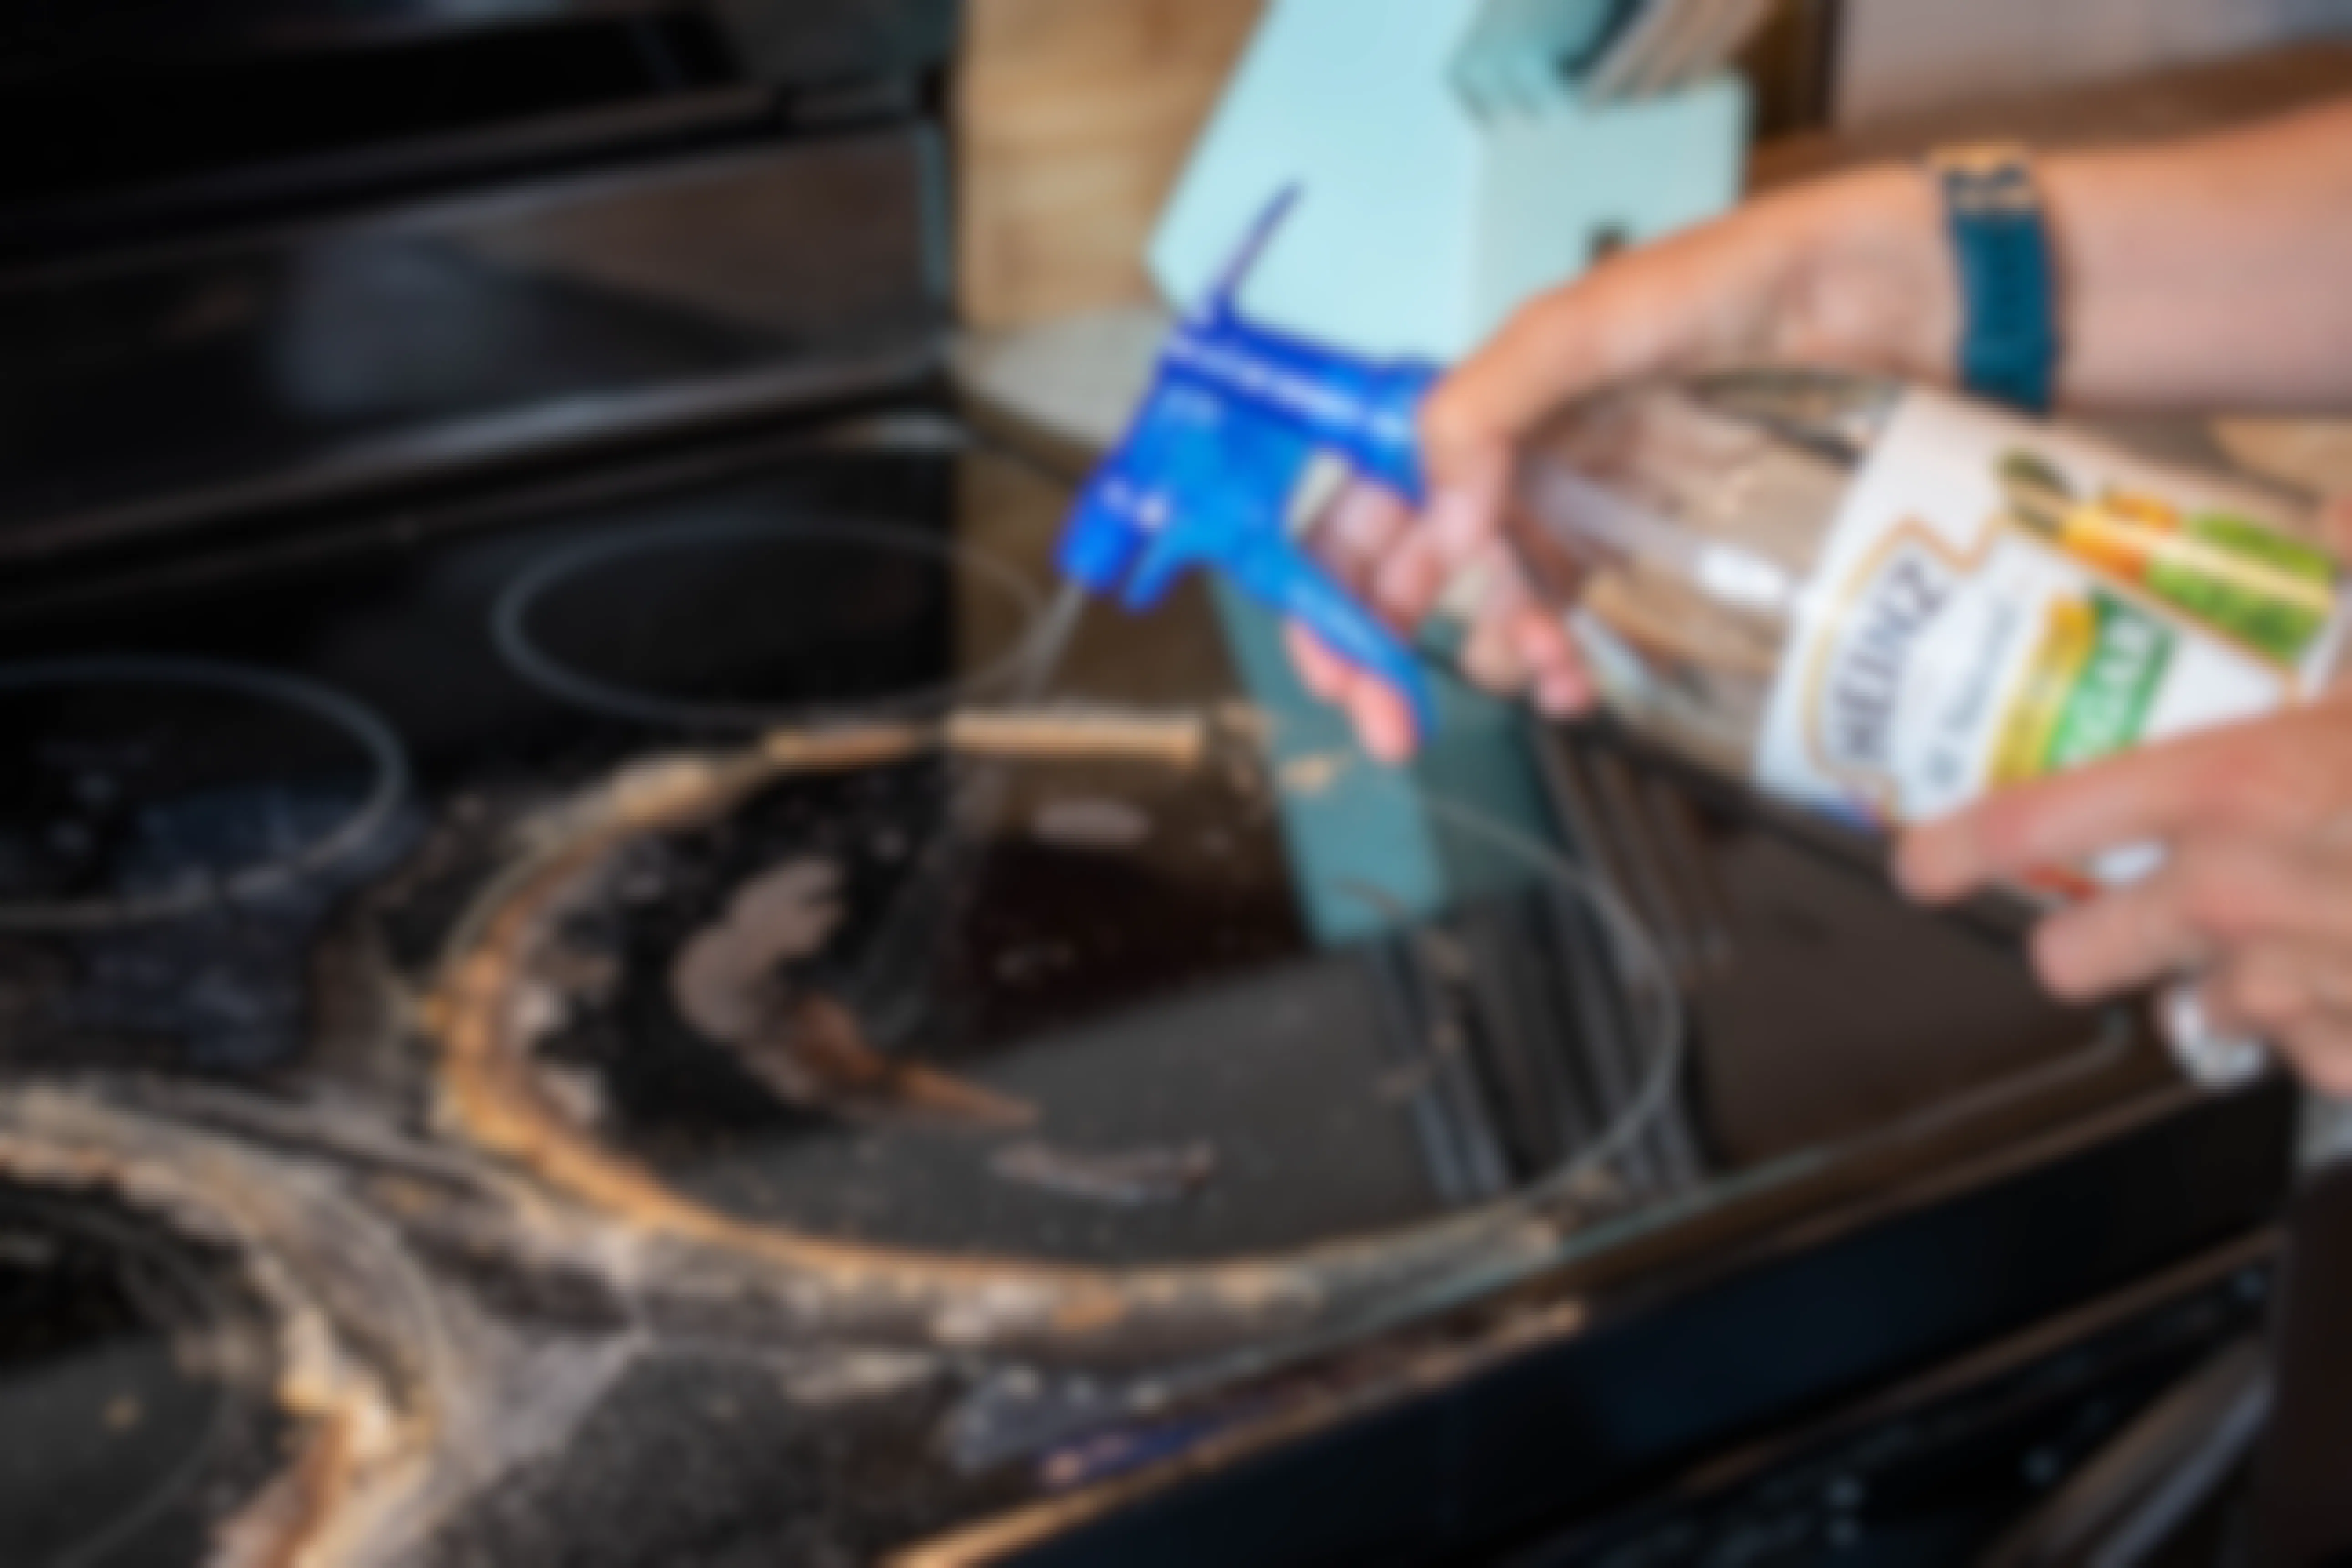 13 Easy Ways to Clean Your Glass Stove Top That Actually Work